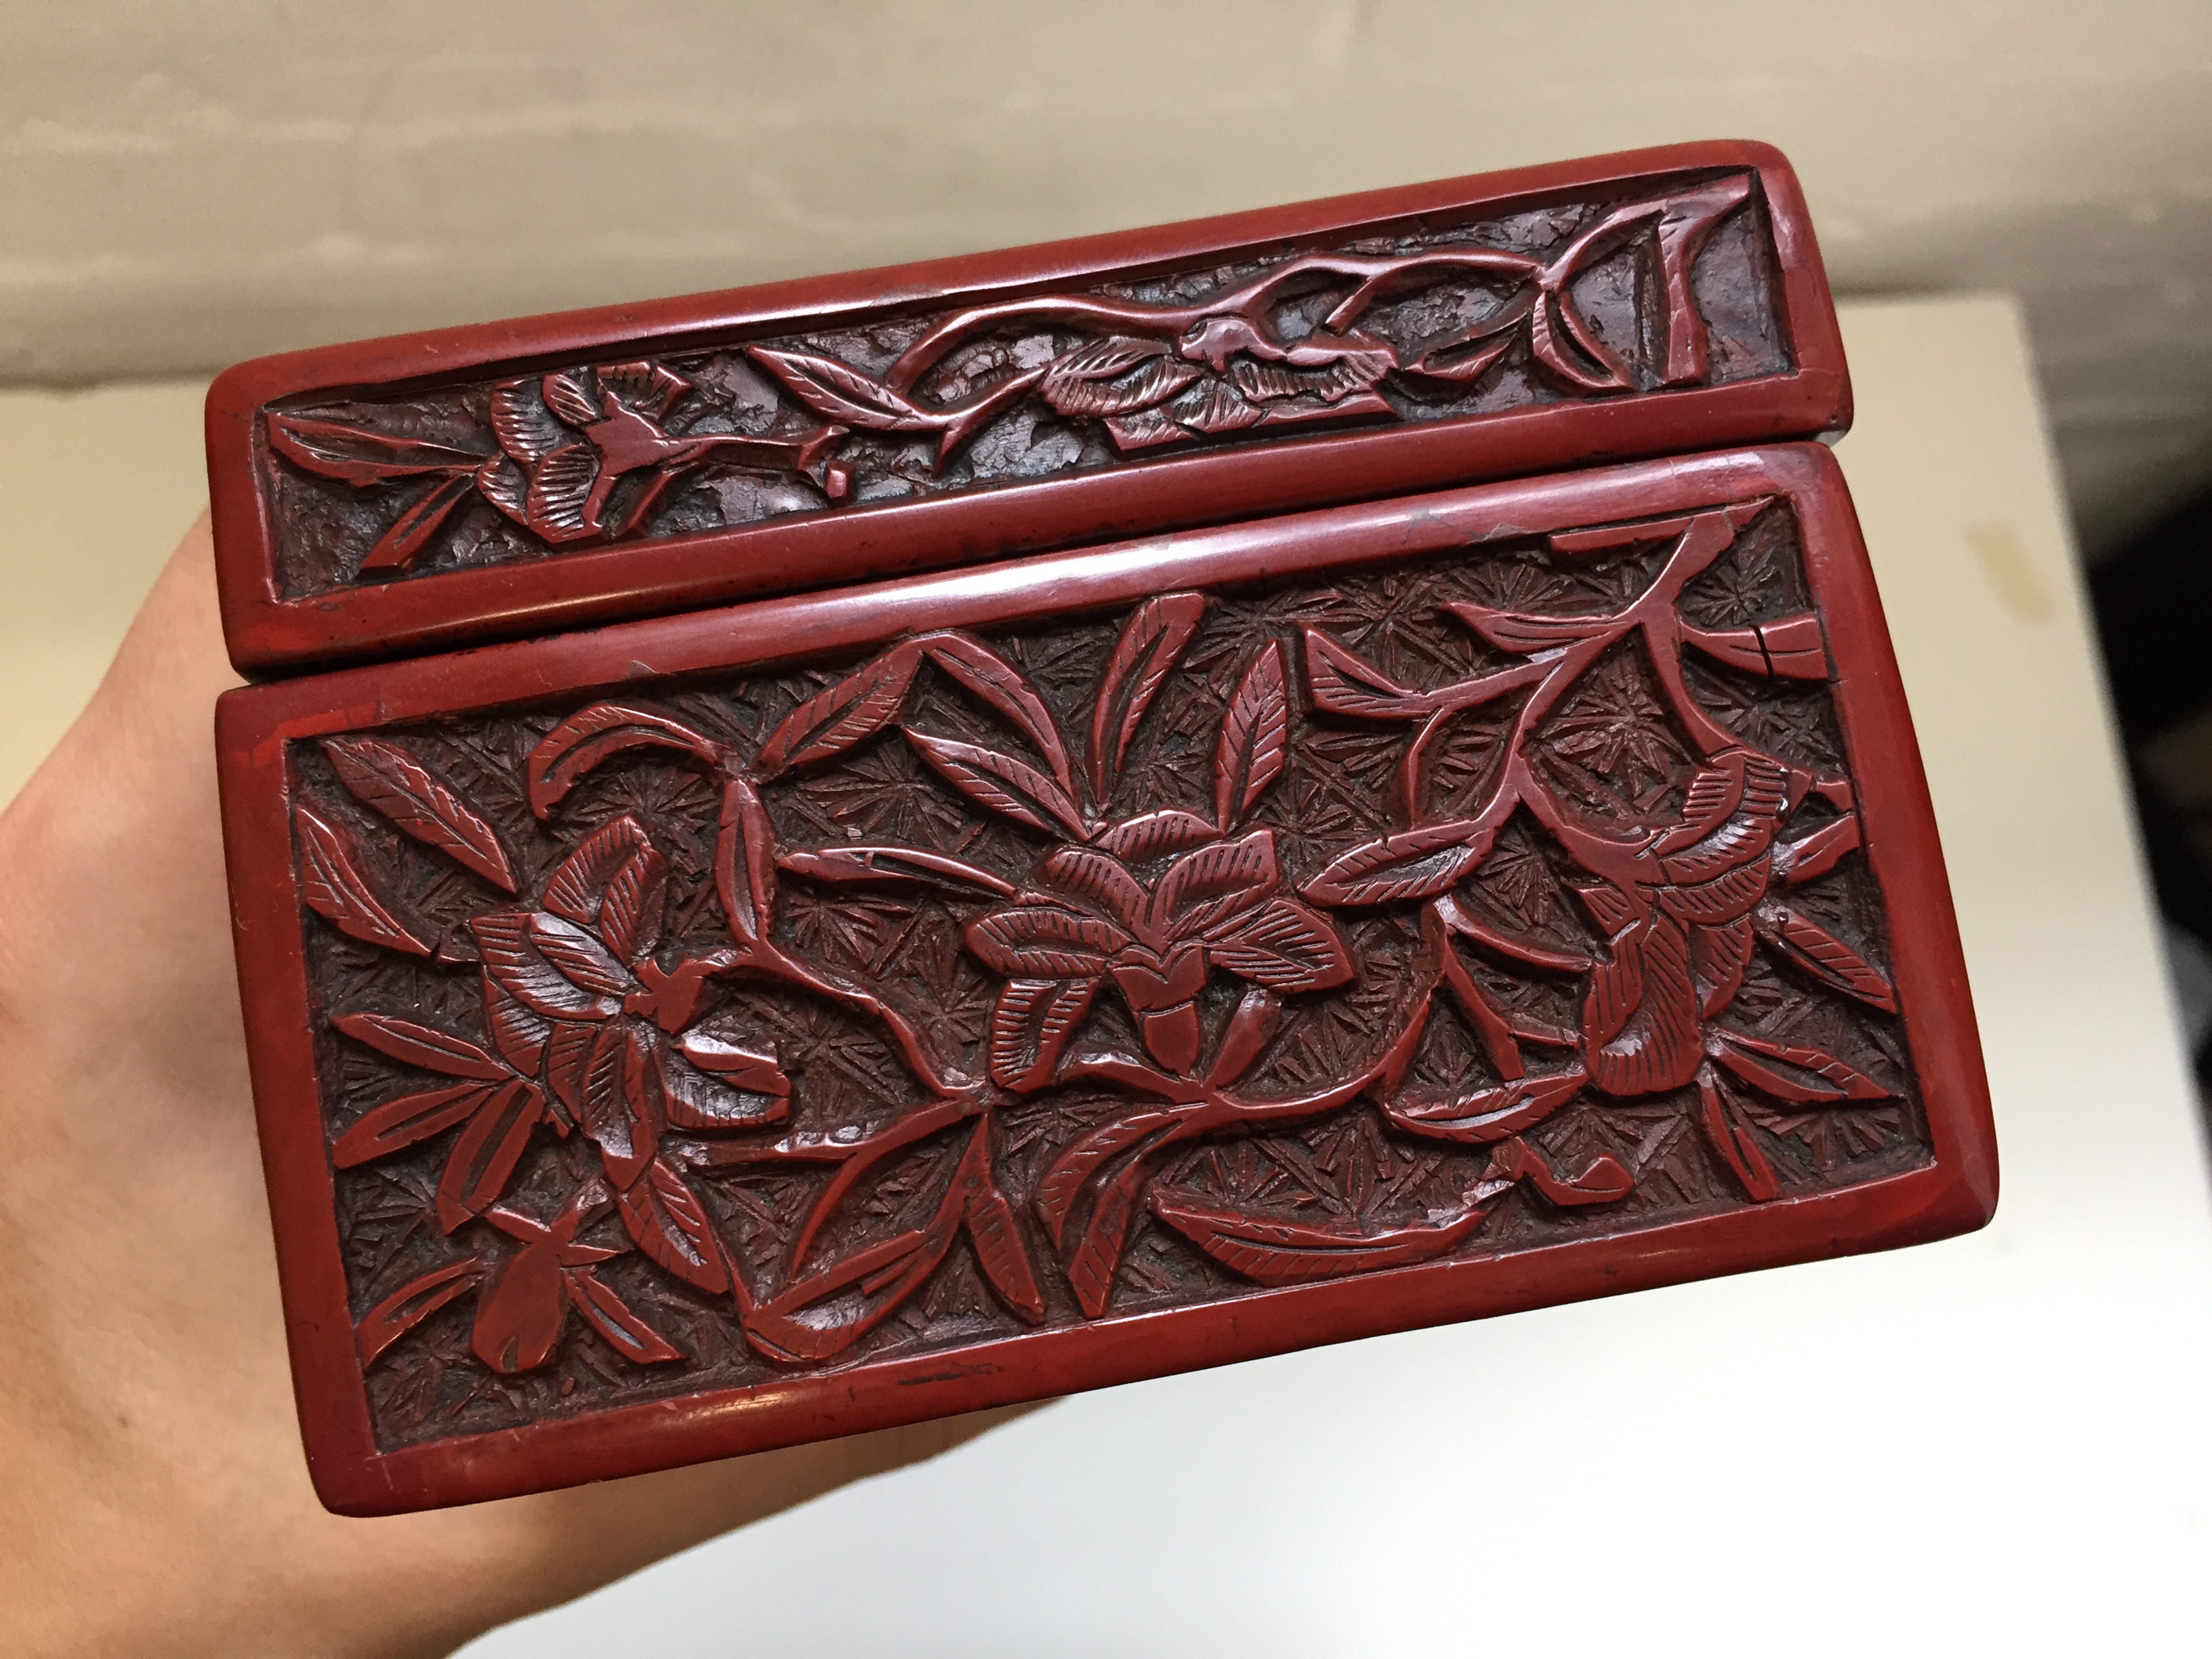 A CHINESE CINNABAR LACQUER 'MUSICIAN' BOX AND COVER 晚明 剔紅圖高士行樂圖紋蓋盒 - Image 8 of 20